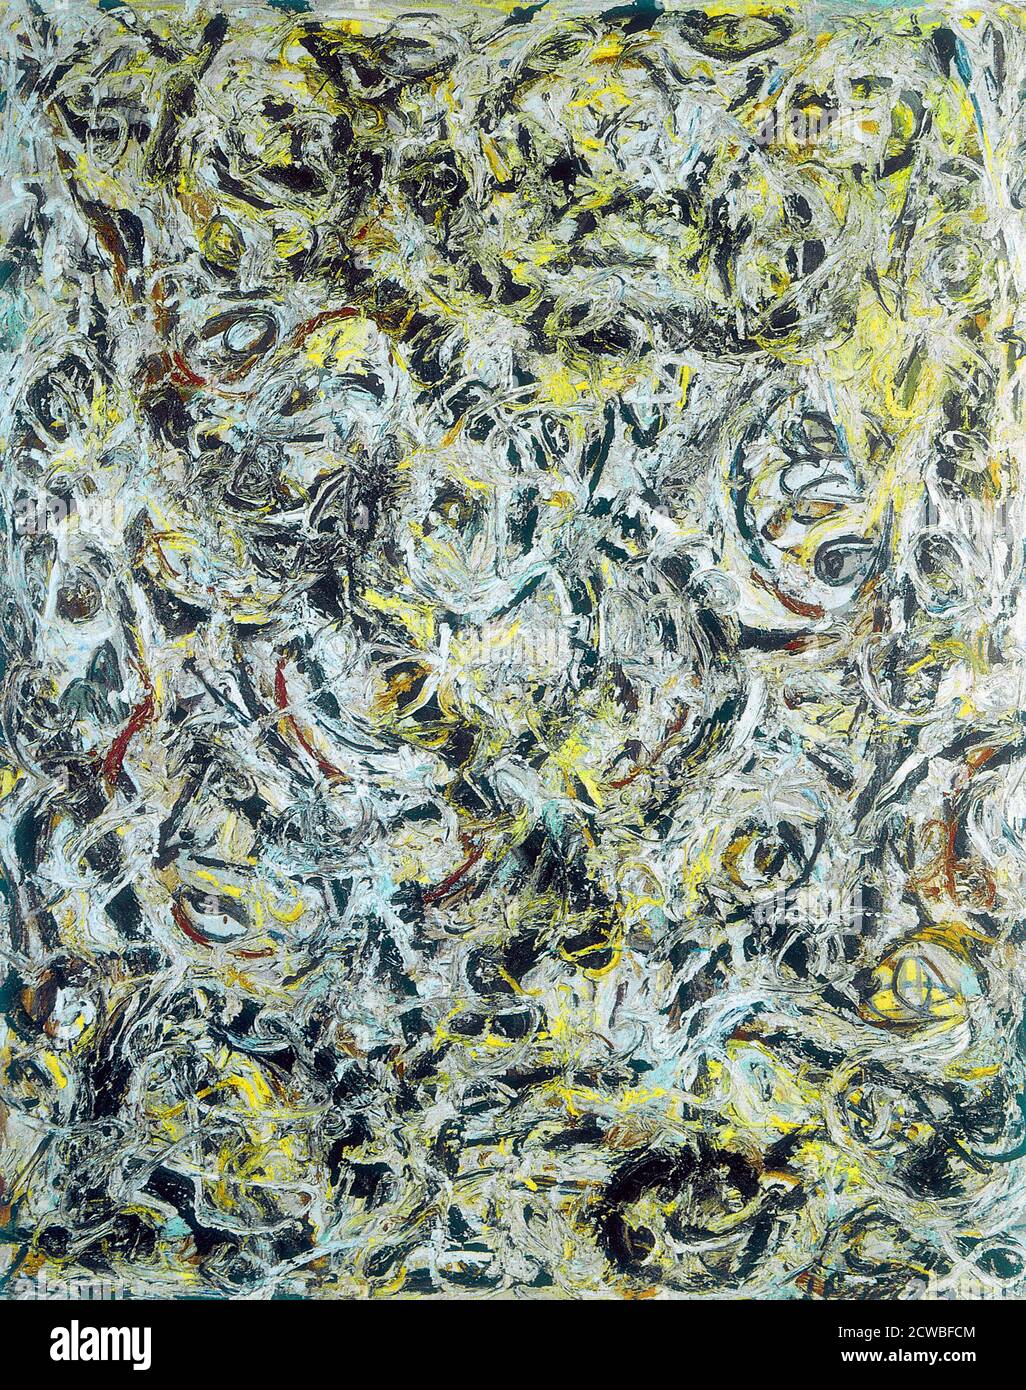 Eyes in the Heat 1947 by Jackson Pollock, 1912-1956. Eyes in the Heat is one of the artist's poured paintings. Oil and enamel on canvas Stock Photo